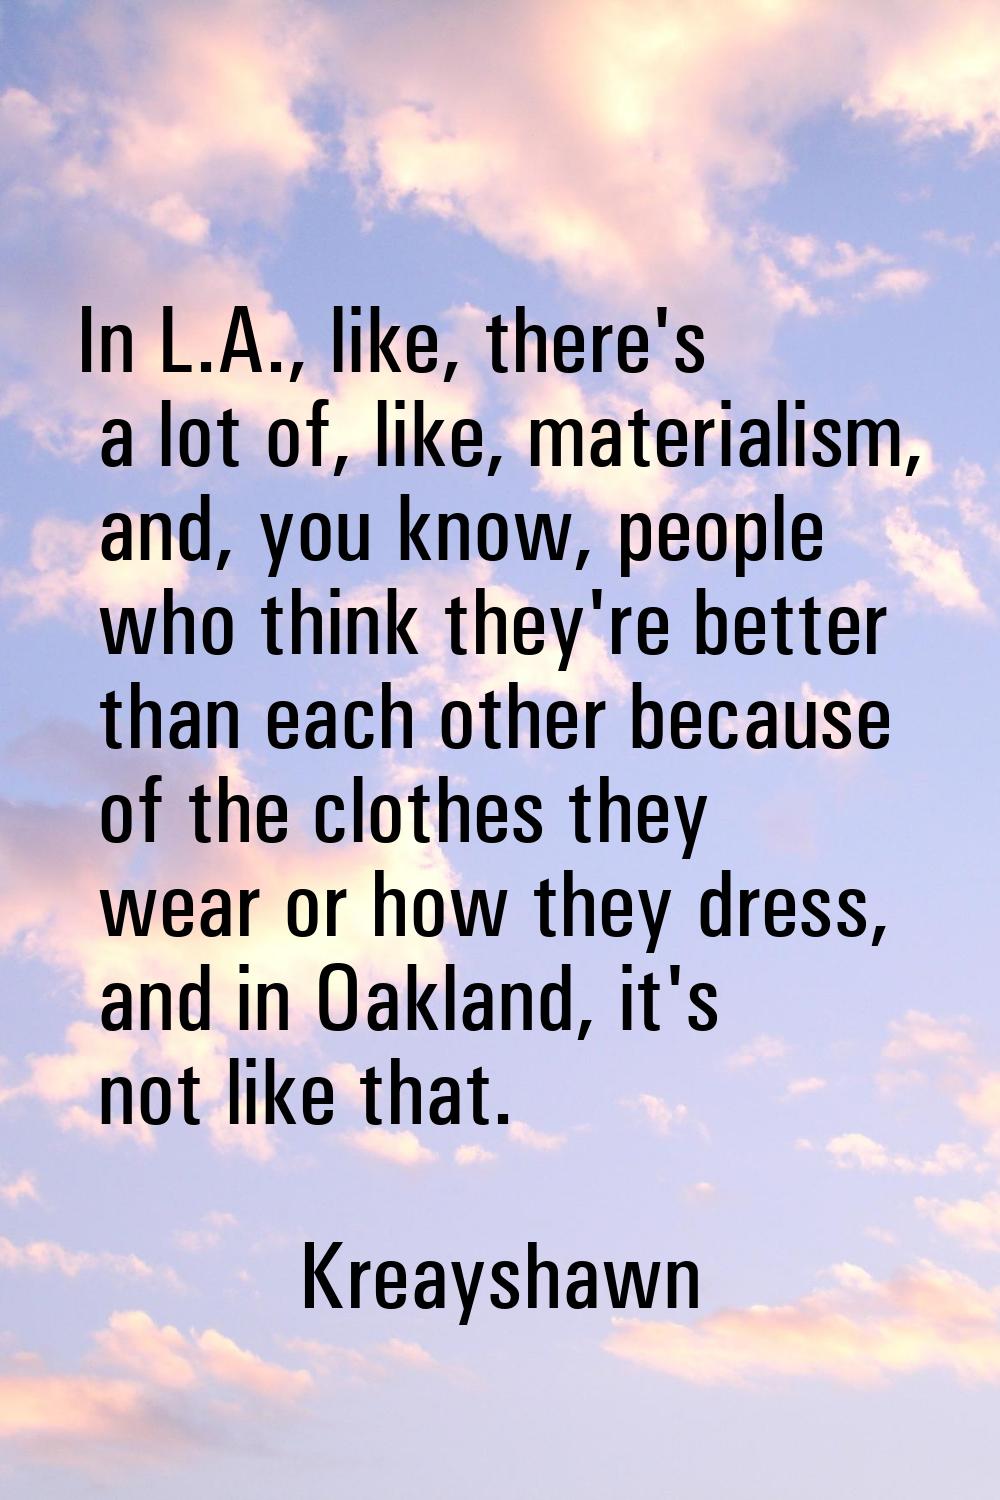 In L.A., like, there's a lot of, like, materialism, and, you know, people who think they're better 